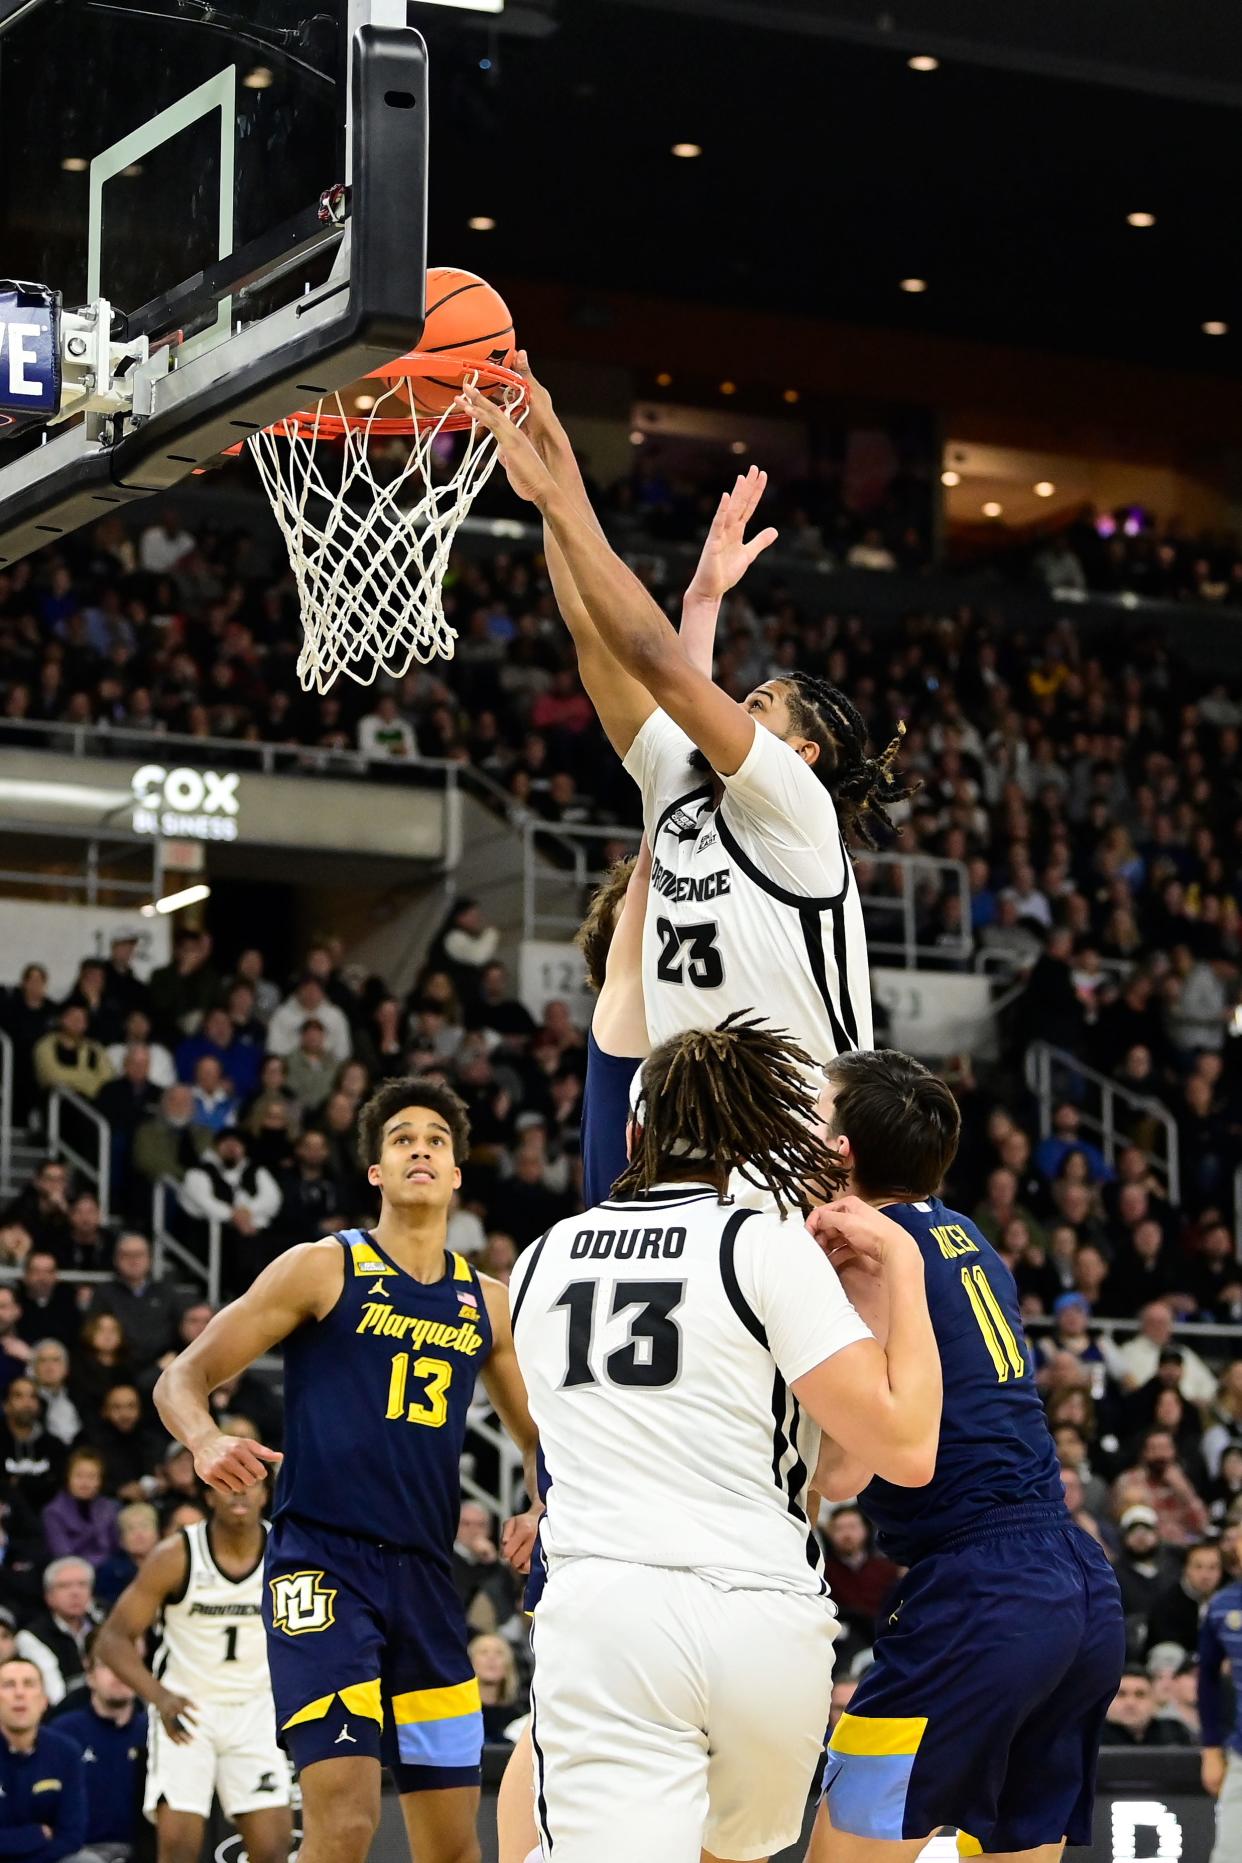 Dec 19, 2023; Providence, Rhode Island, USA; Providence Friars forward Bryce Hopkins (23) shoots during the first half against the Marquette Golden Eagles at Amica Mutual Pavilion. Mandatory Credit: Eric Canha-USA TODAY Sports